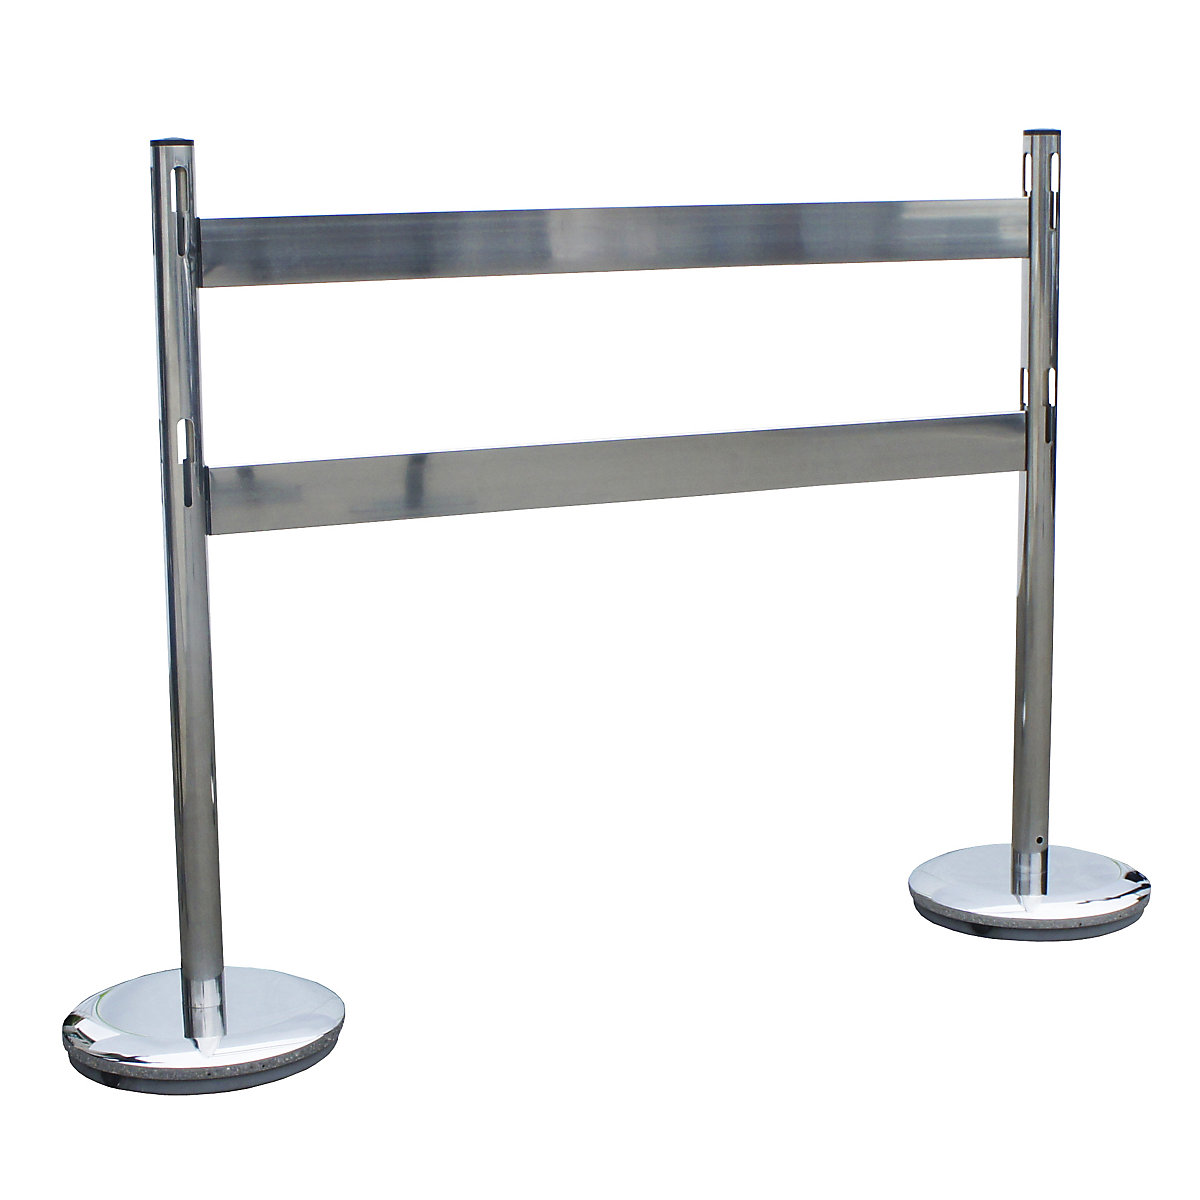 Barrier post set with rails – VISO, 2 posts, 2 rails, stainless steel / chrome plated-3